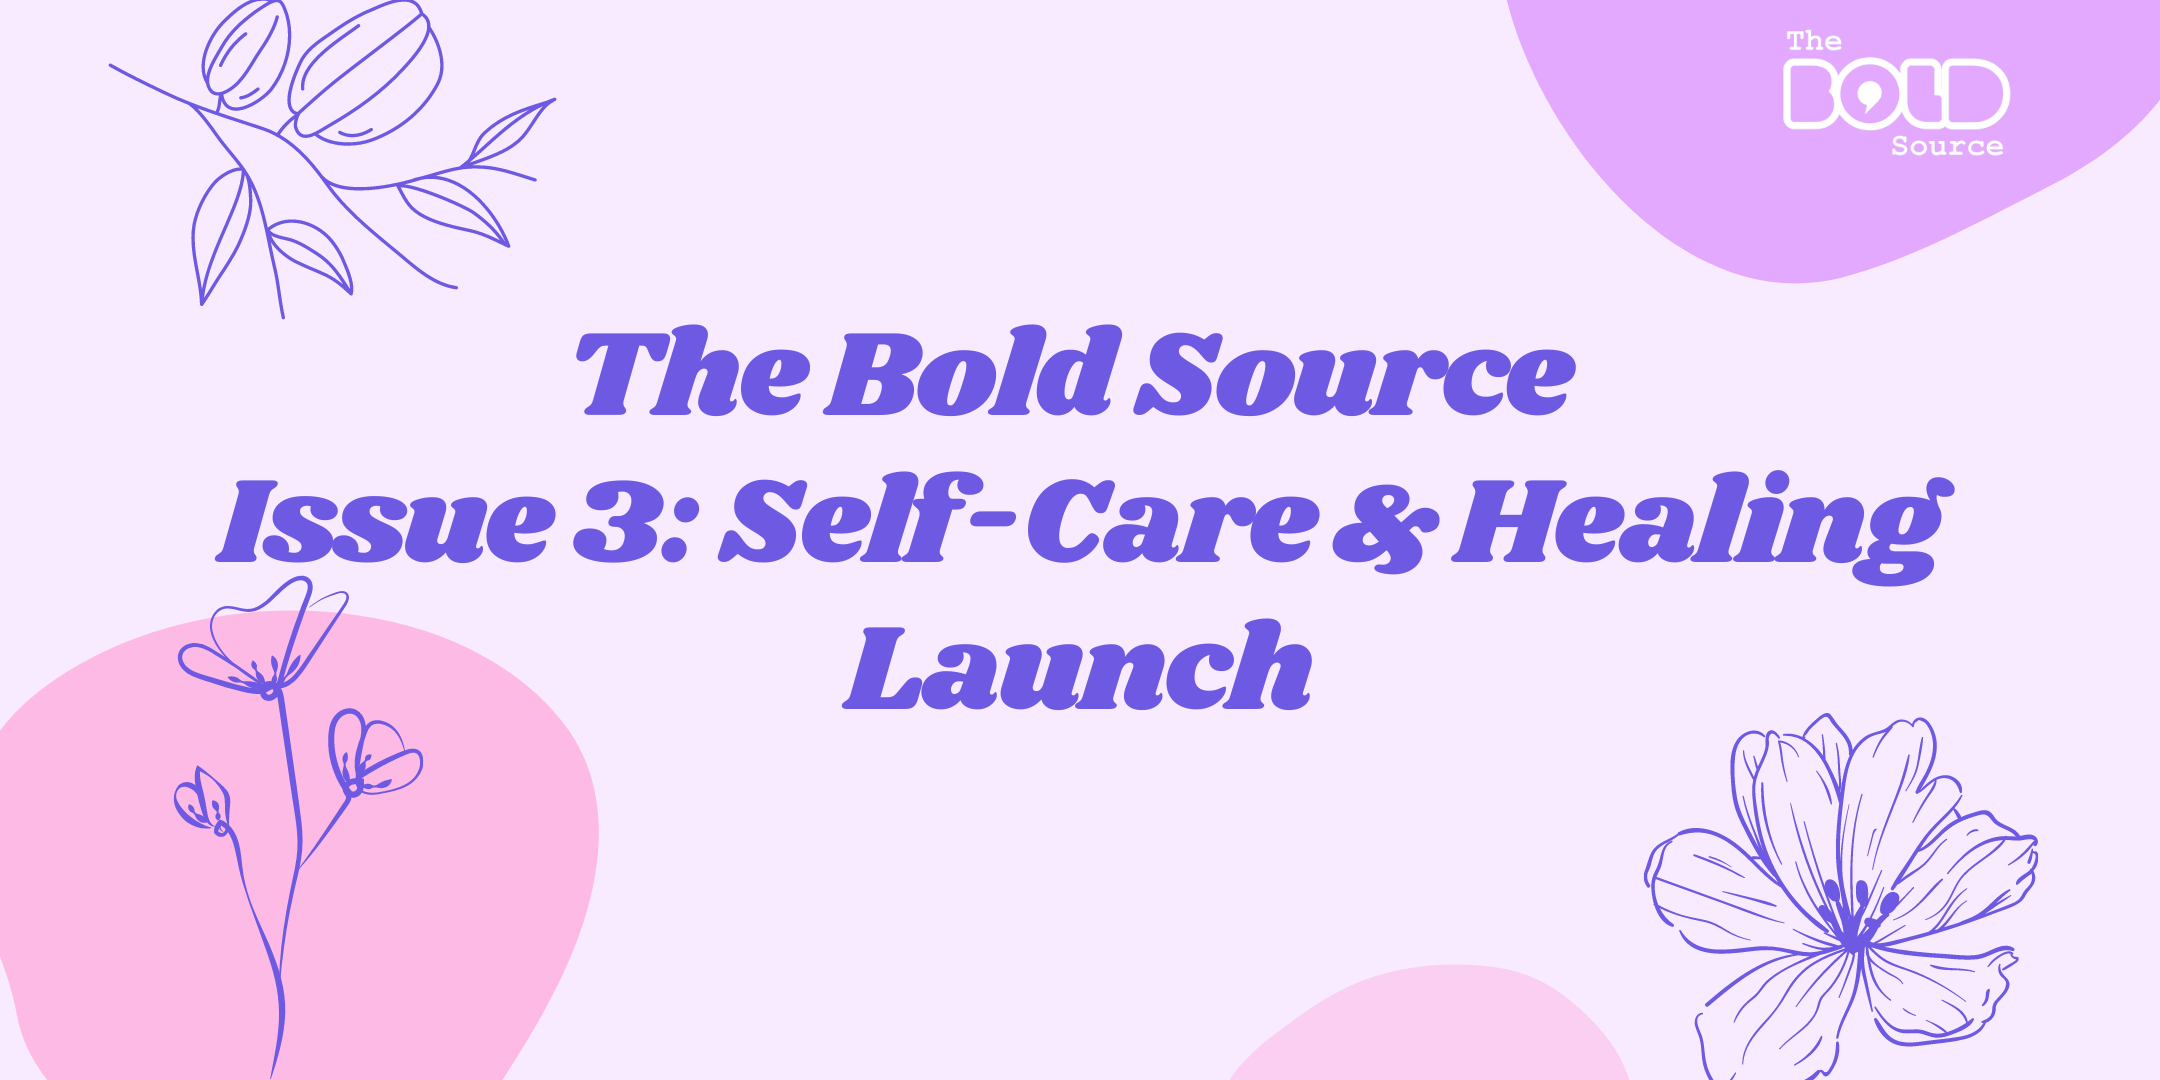 The Bold Source Issue 3 Launch